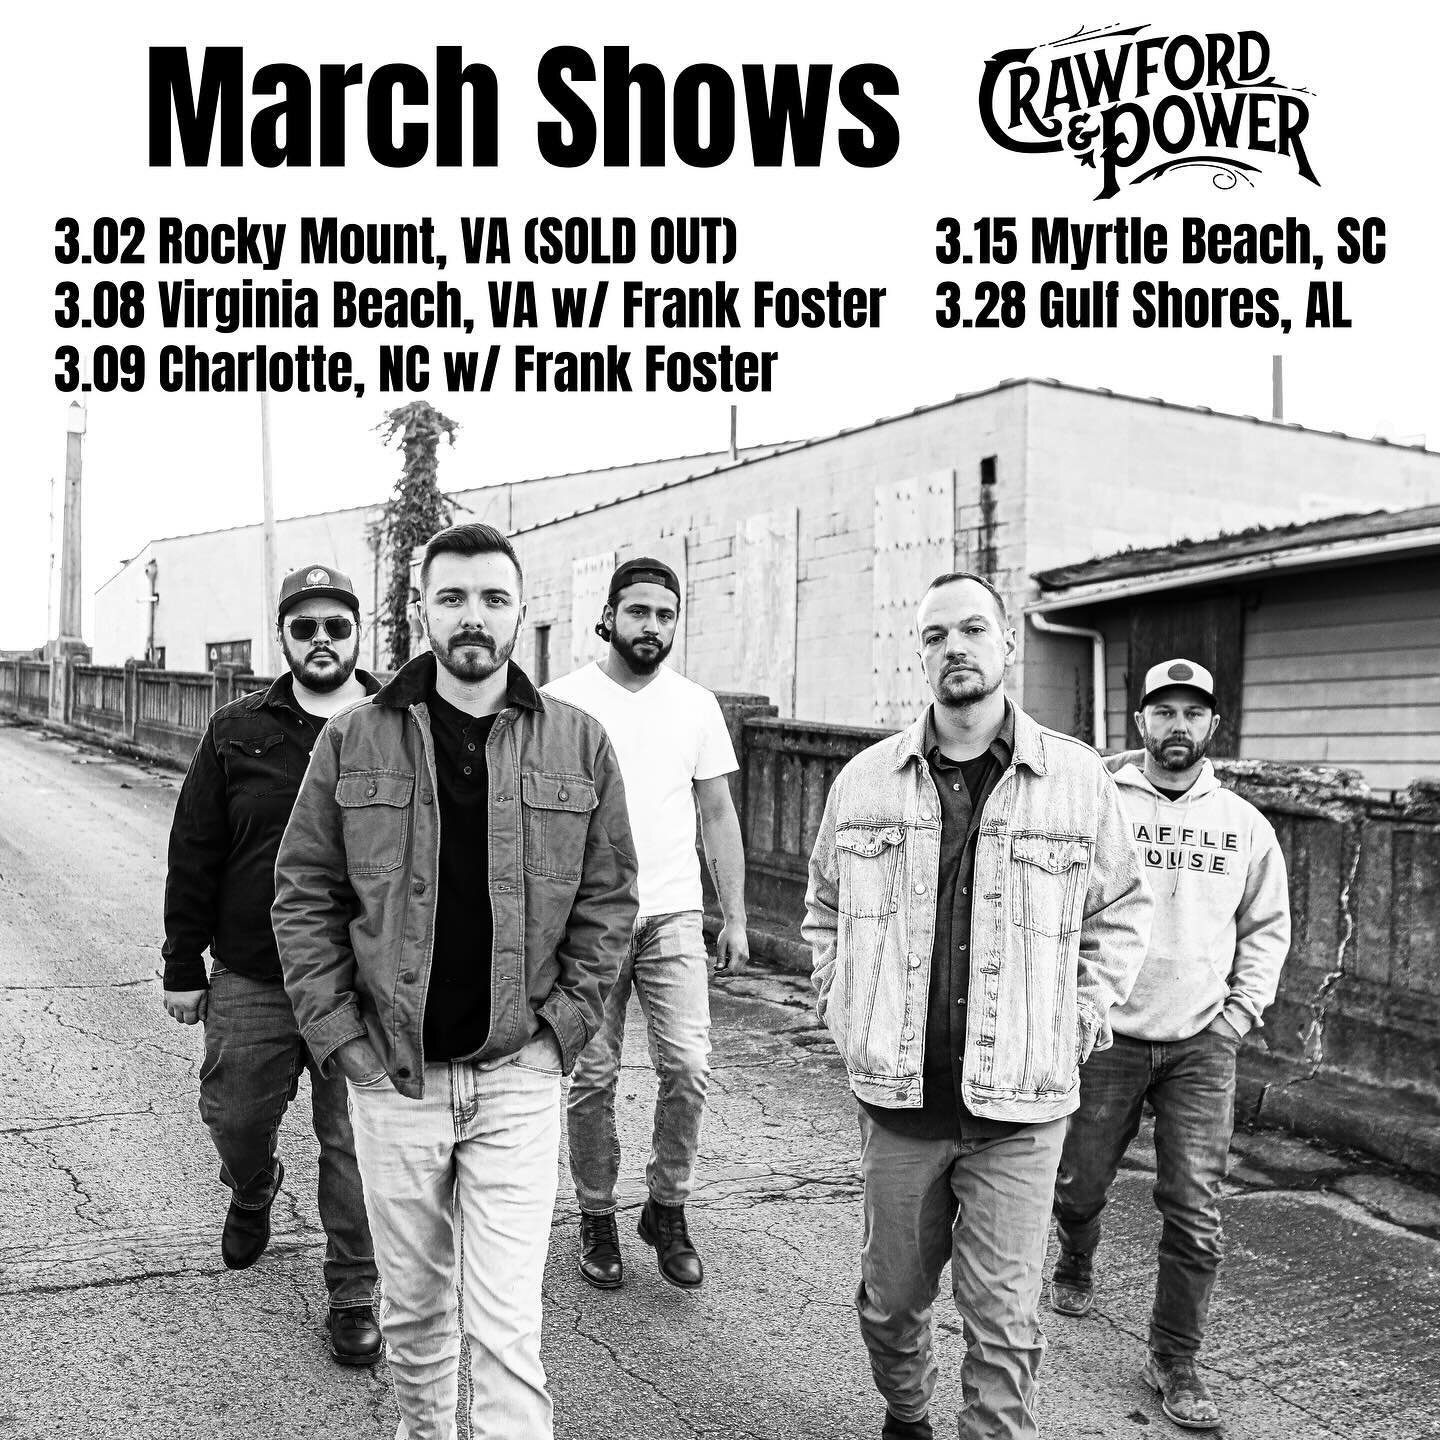 March Show Schedule 🚐 💨 

March 2nd- @harvester_music (Rocky Mount, VA)
March 8th- @elevation27vb w/ @thefrankfoster (Virginia Beach, VA) 
March 9th- @neighborhoodtheatre w/ @thefrankfoster (Charlotte, NC)
March 15th- @boathousemb (Myrtle Beach, SC